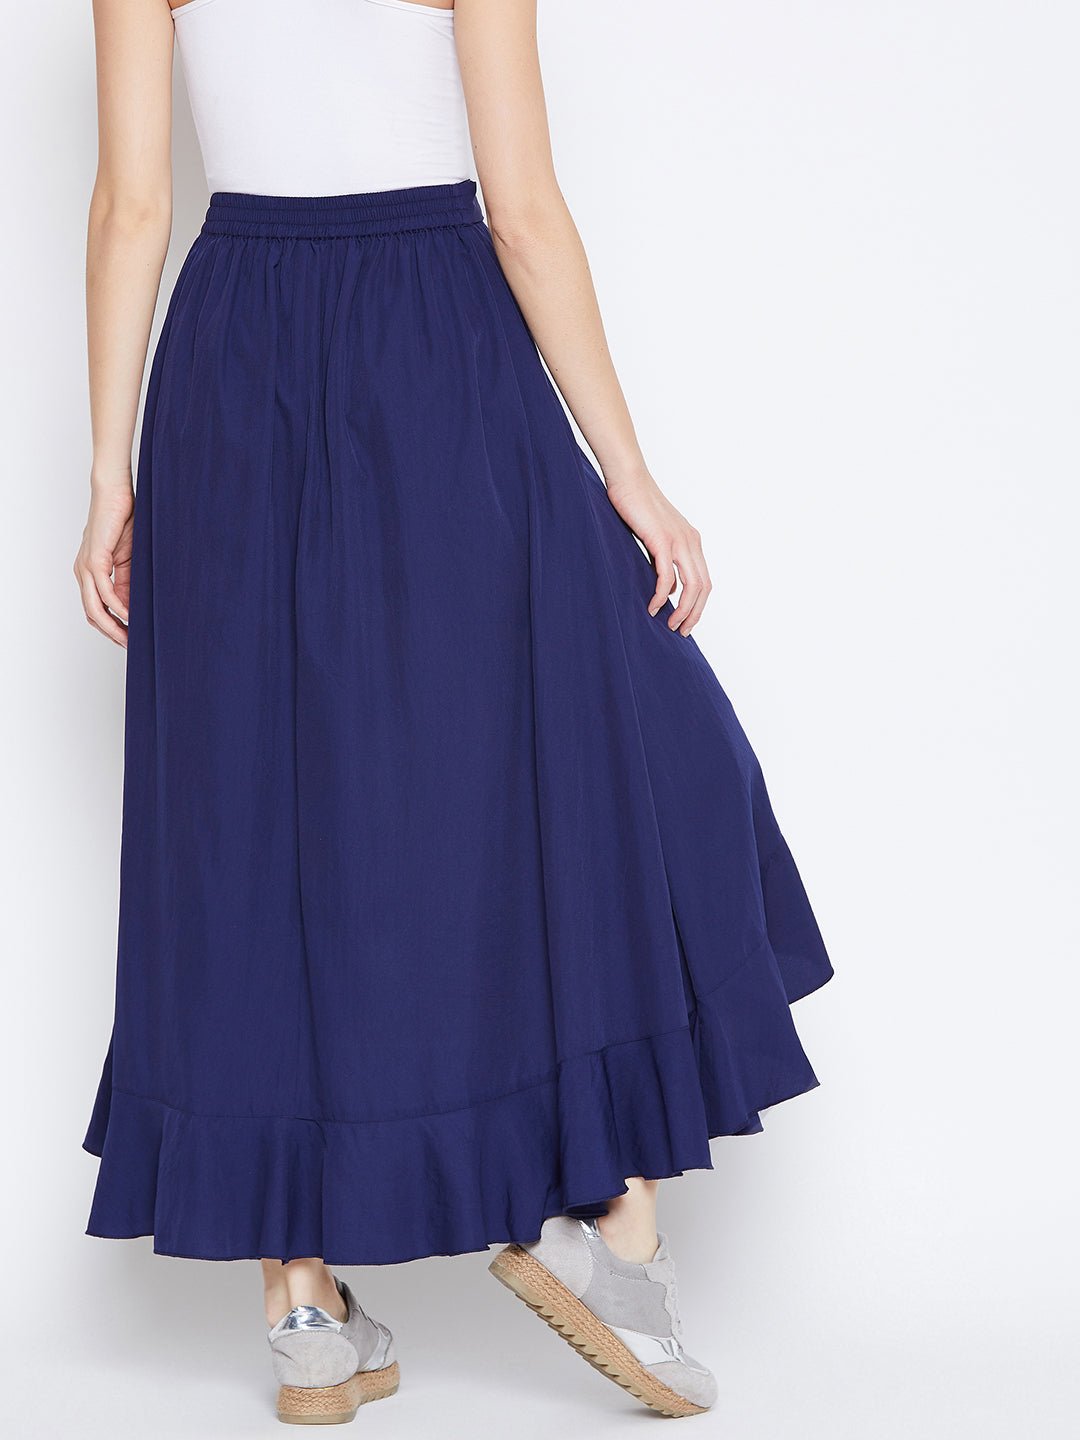 Folk Republic Women Solid Navy Blue Waist Tie-Up High-Low Flared Maxi Skirt with Attached Trousers - #folk republic#